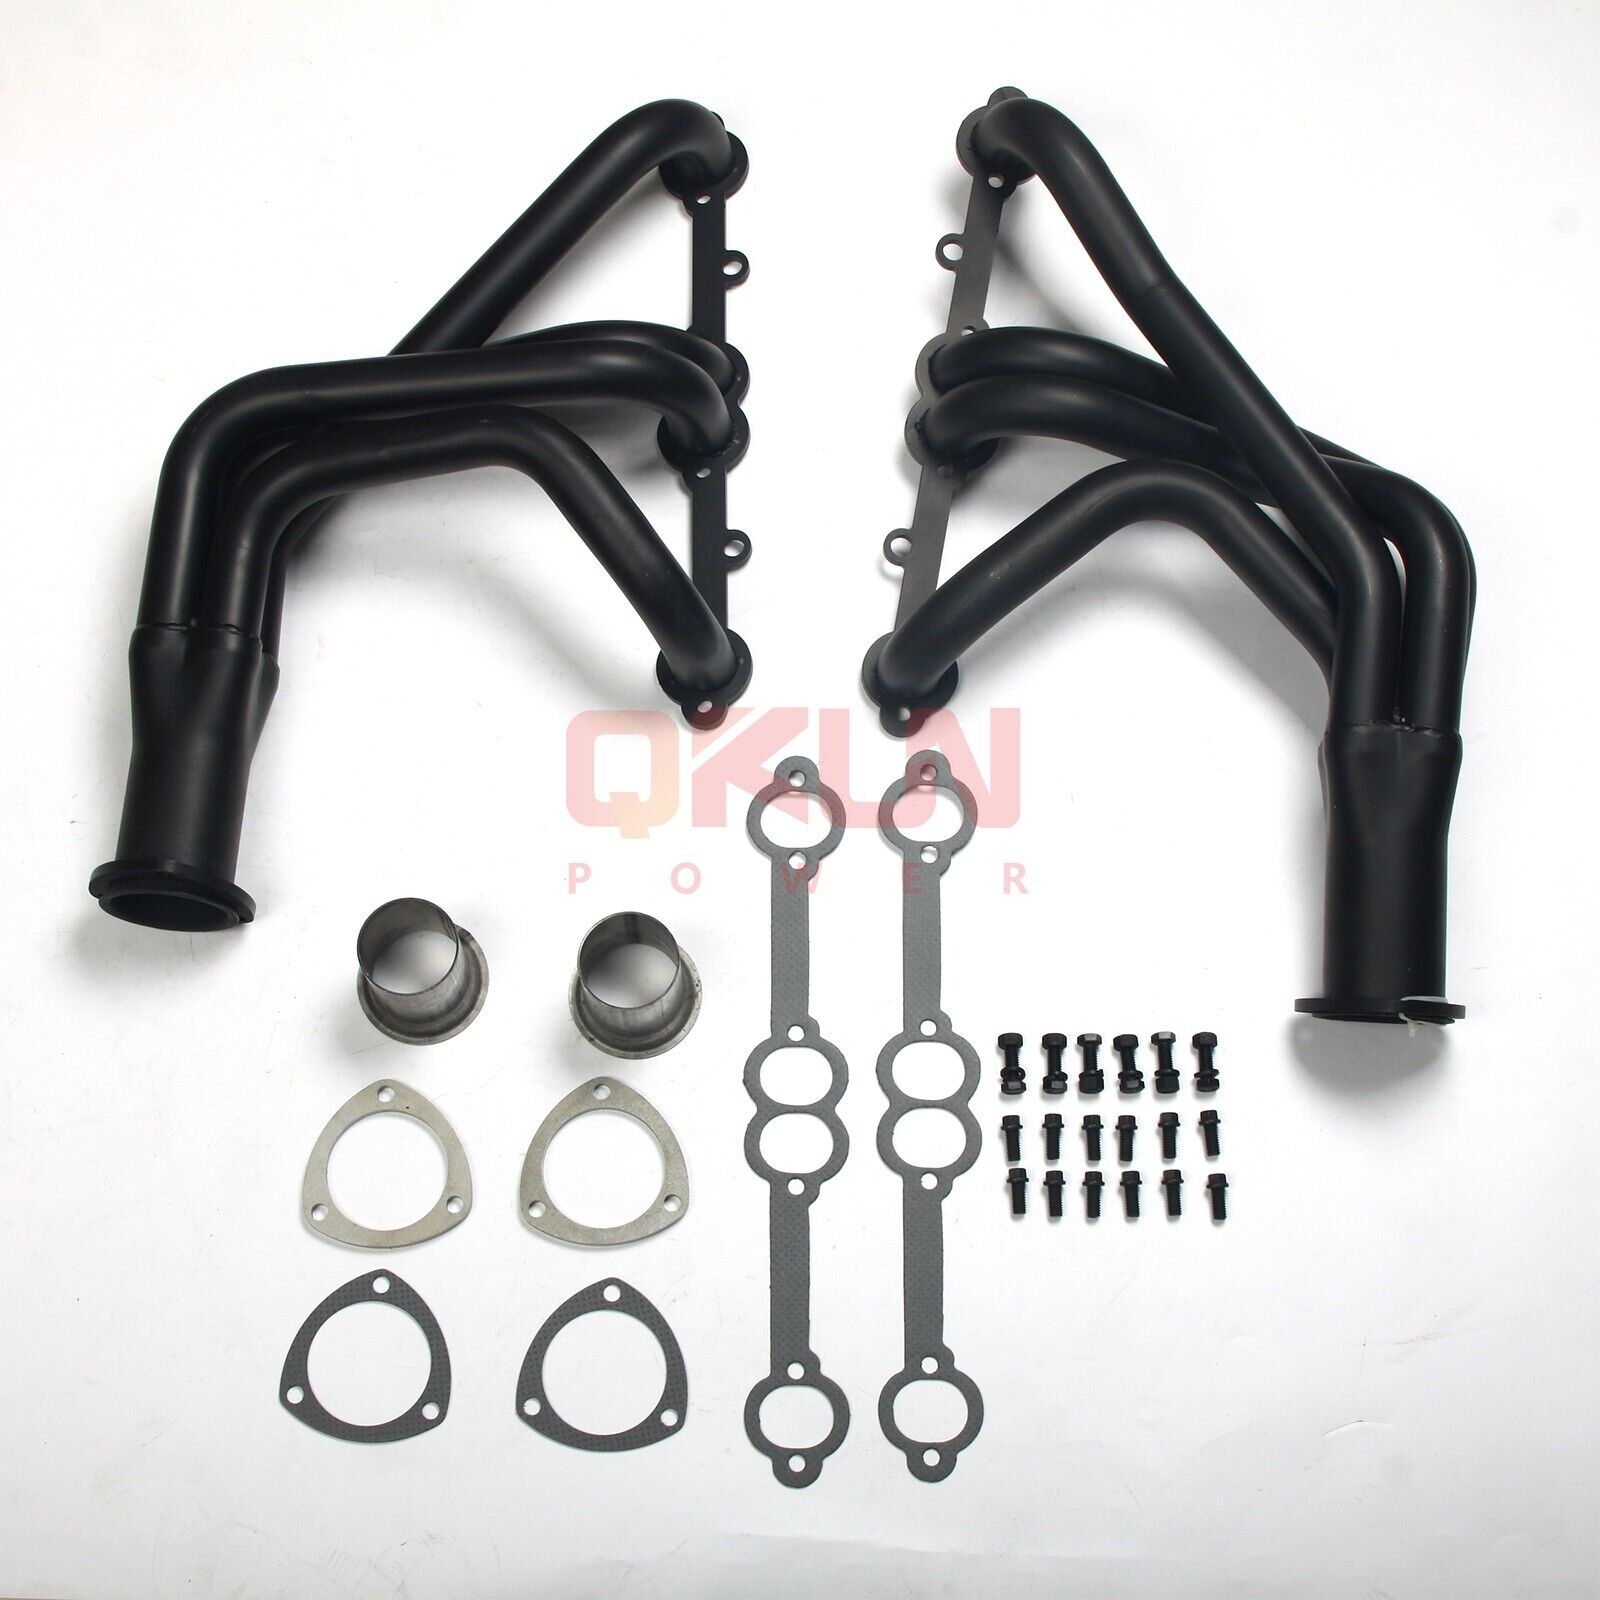 LONG TUBE HEADERS FOR SMALL BLOCK CHEVROLET EDATE(1-5/8 x 3 IN) BLACK PAINT